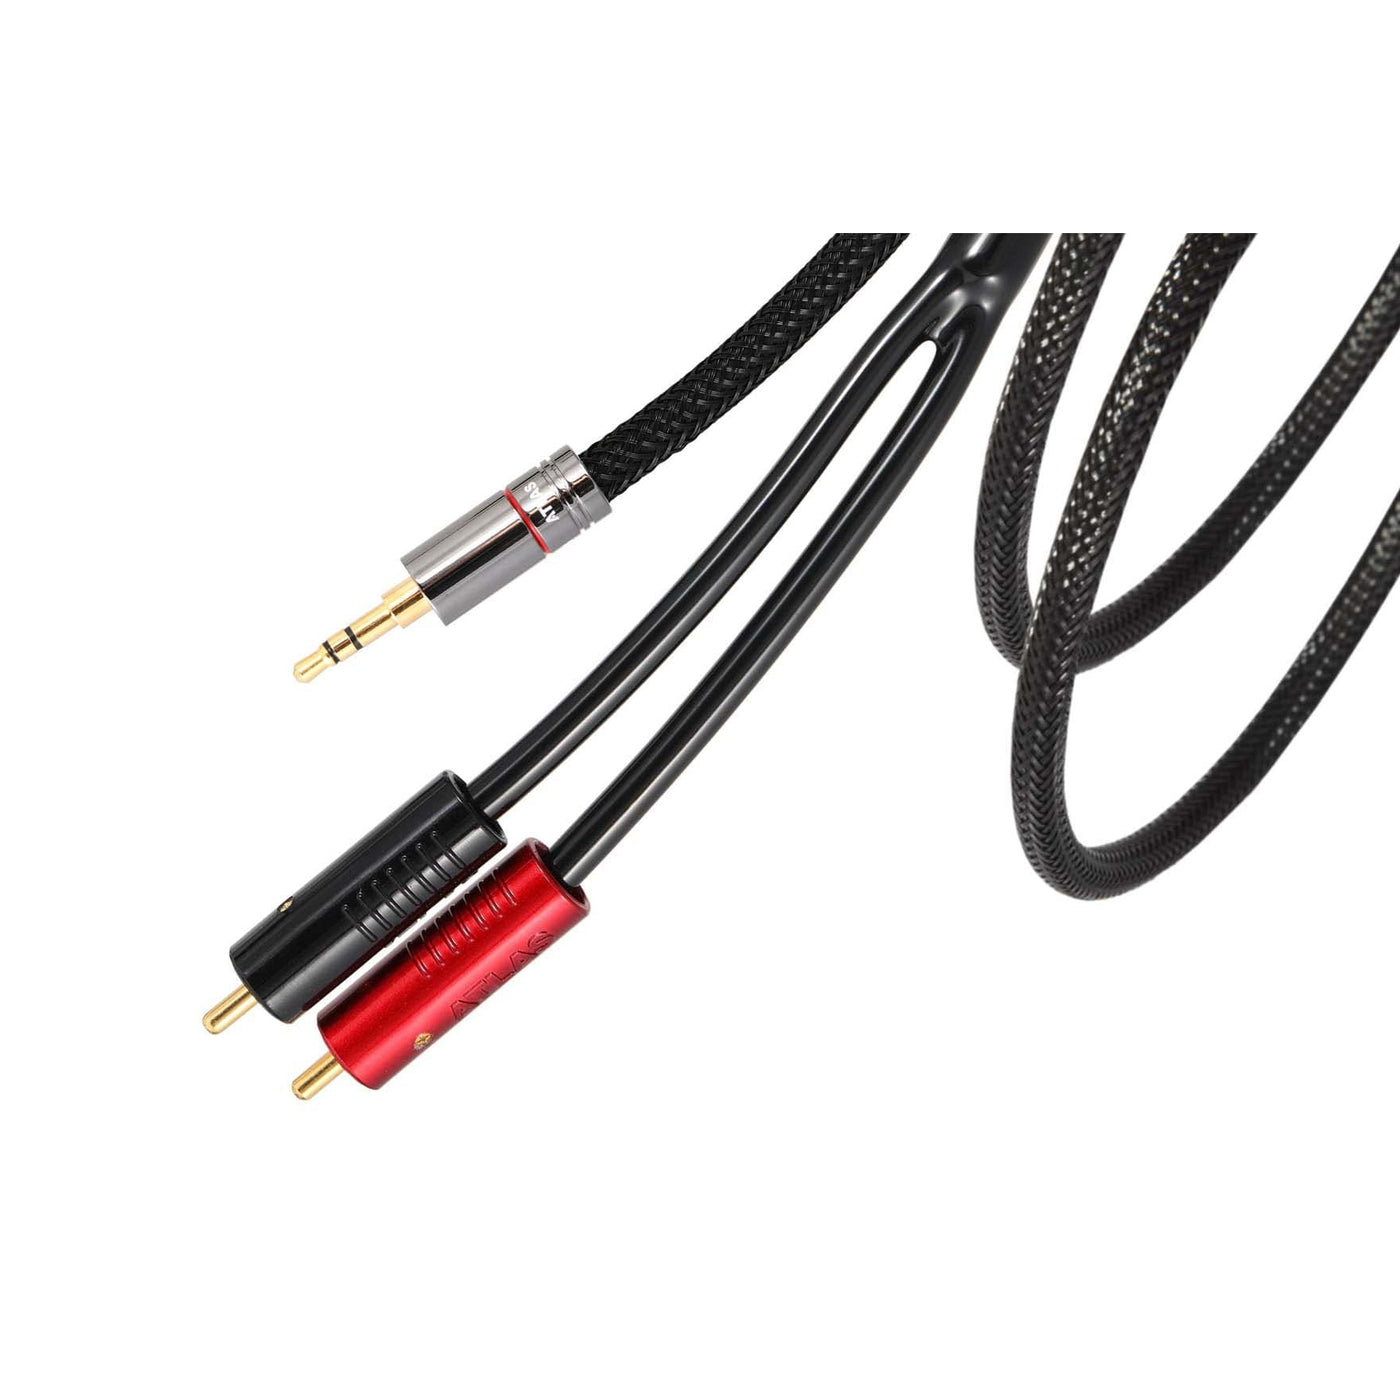 Atlas Hyper DD Metik 3.5mm—Achromatic RCA S/PDIF Cable at Audio Influence